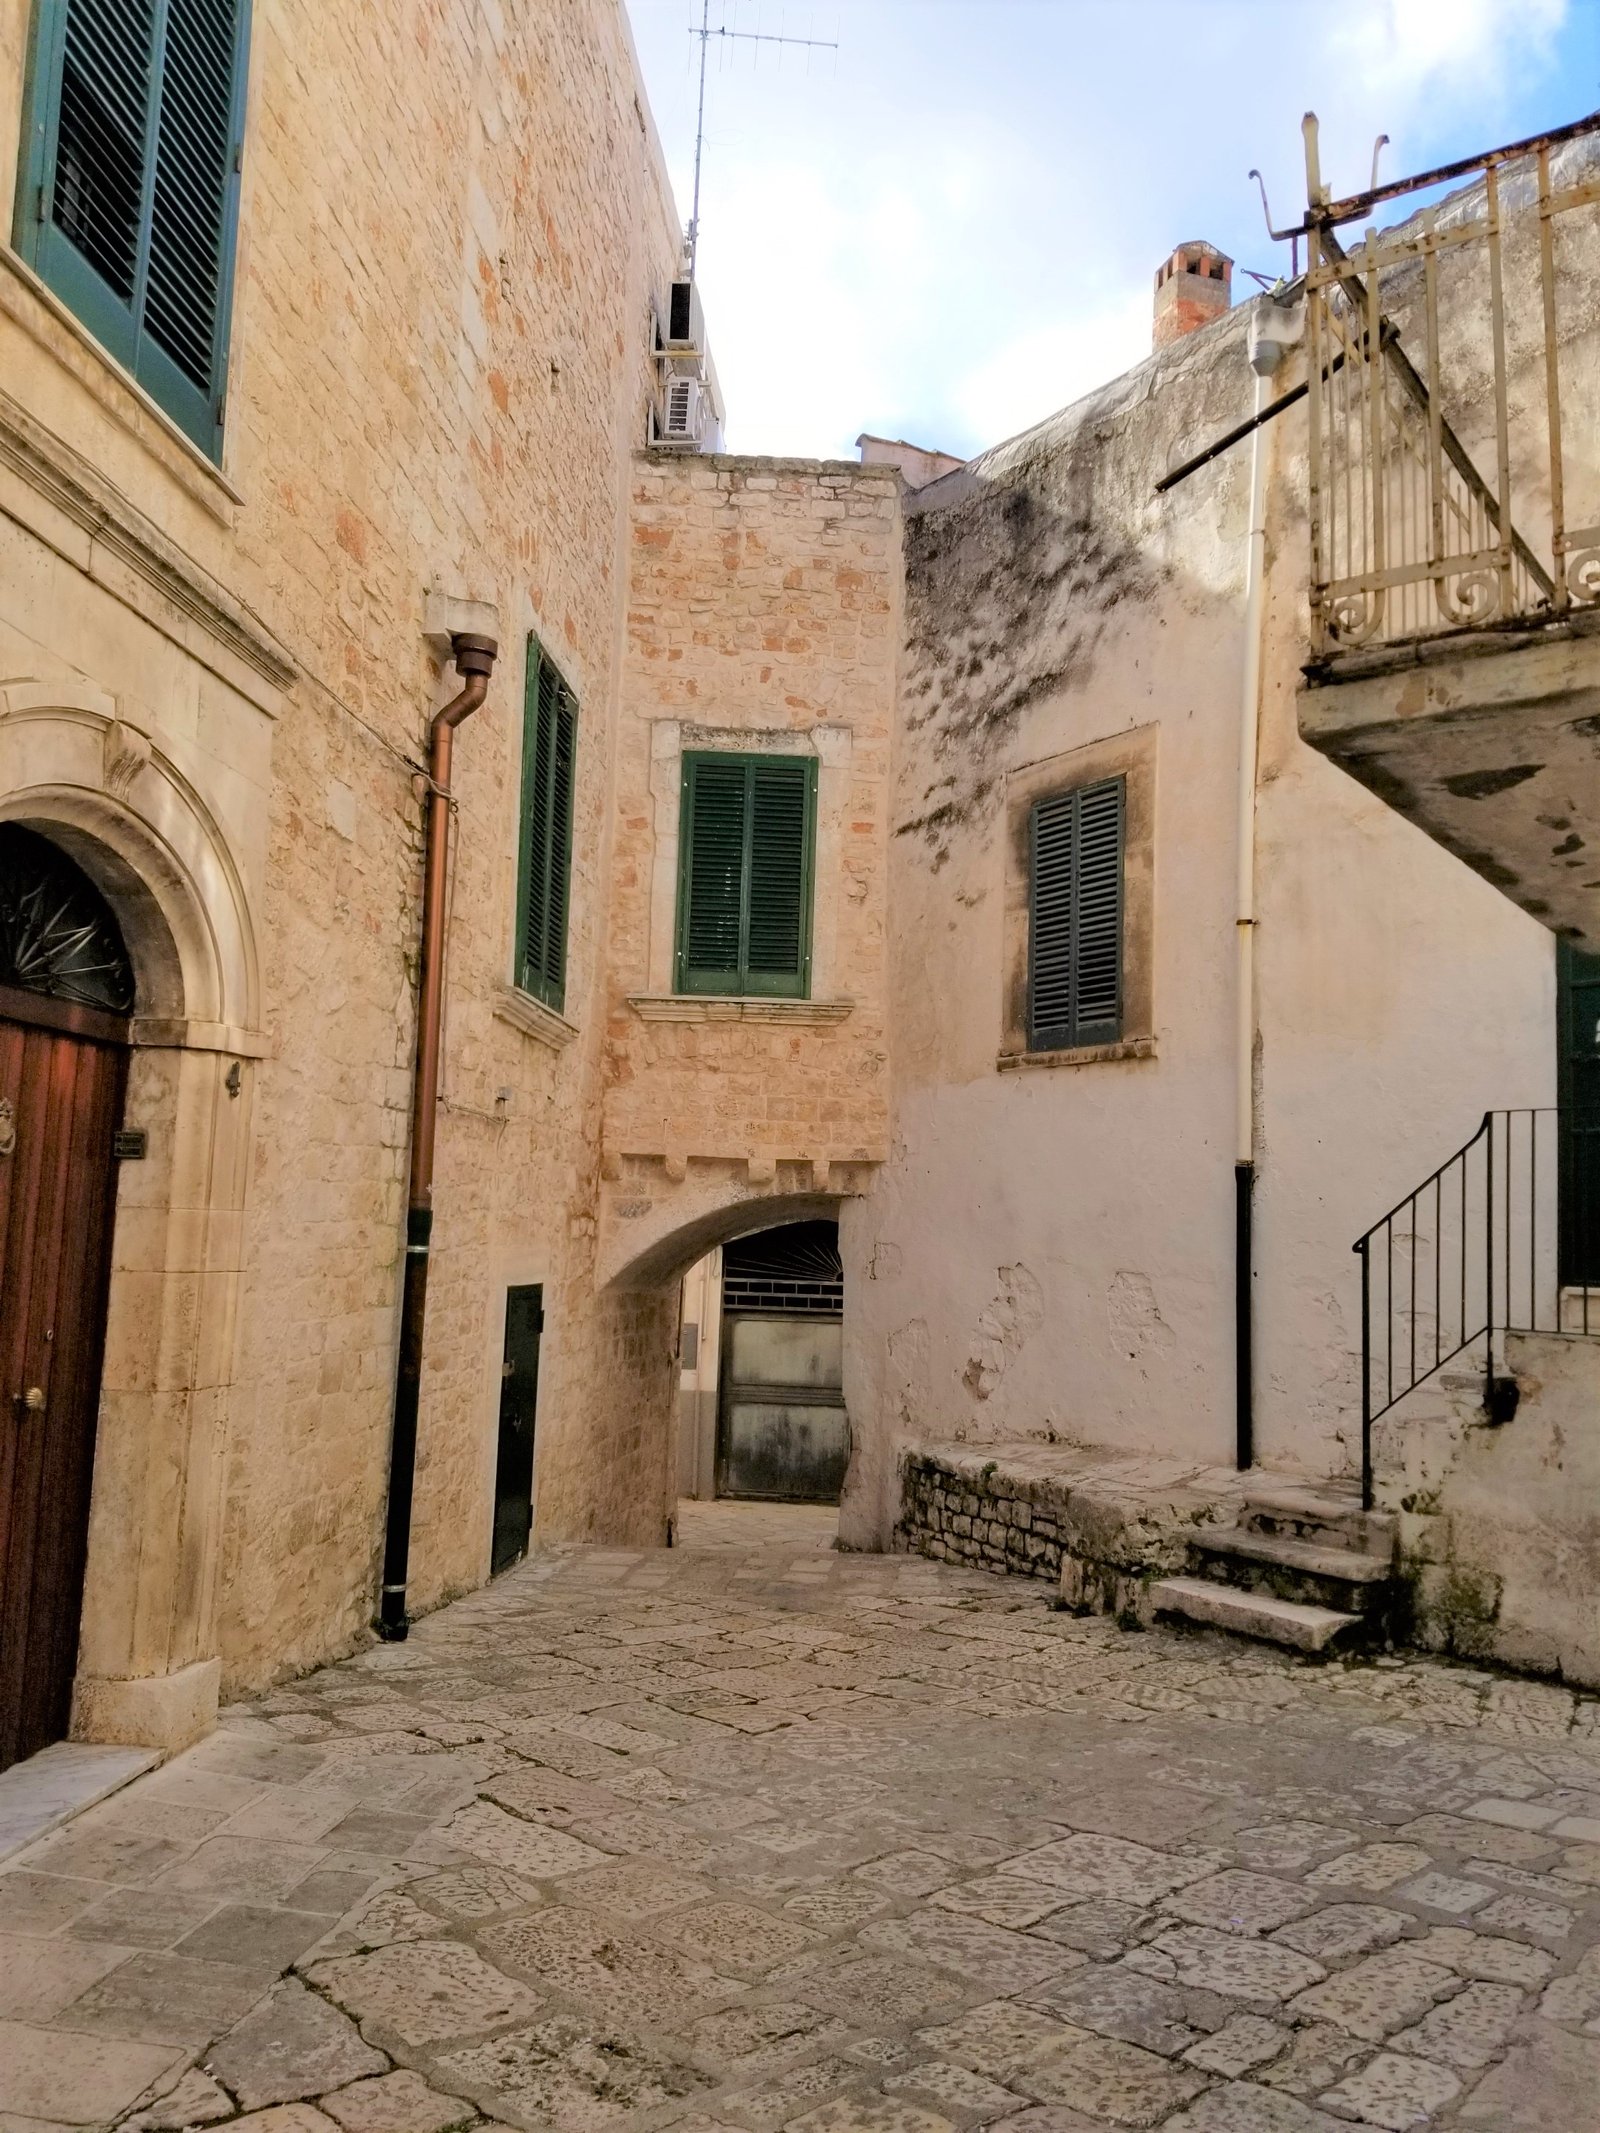 Conversano, Italy in Puglia region is beautiful. Join our journey at ouritalianjourney.com